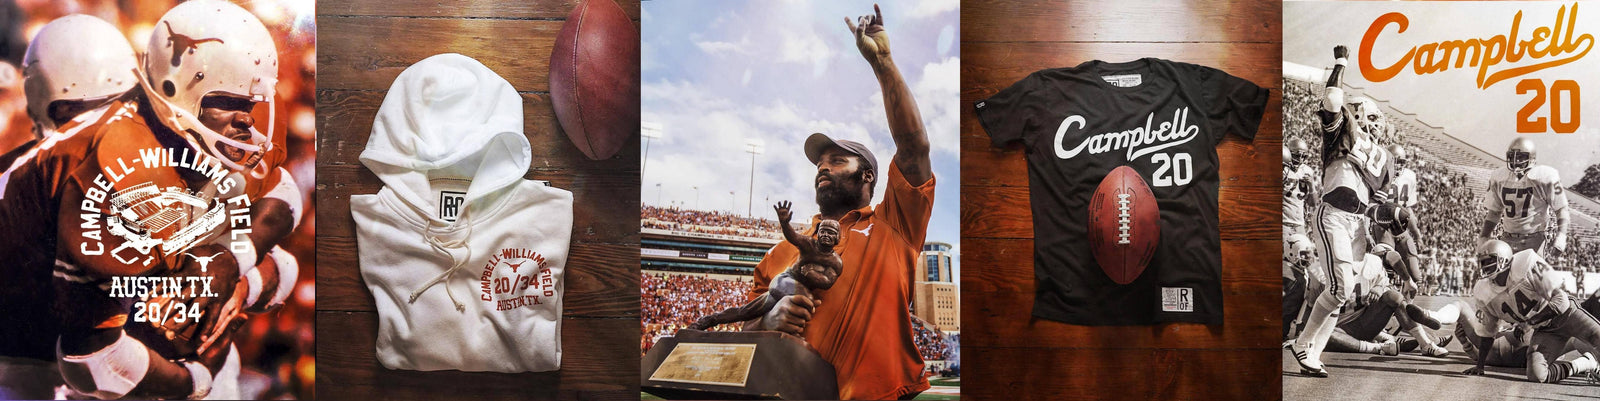 Texas officially dedicates Campbell-Williams Field to honor Earl Campbell,  Ricky Williams